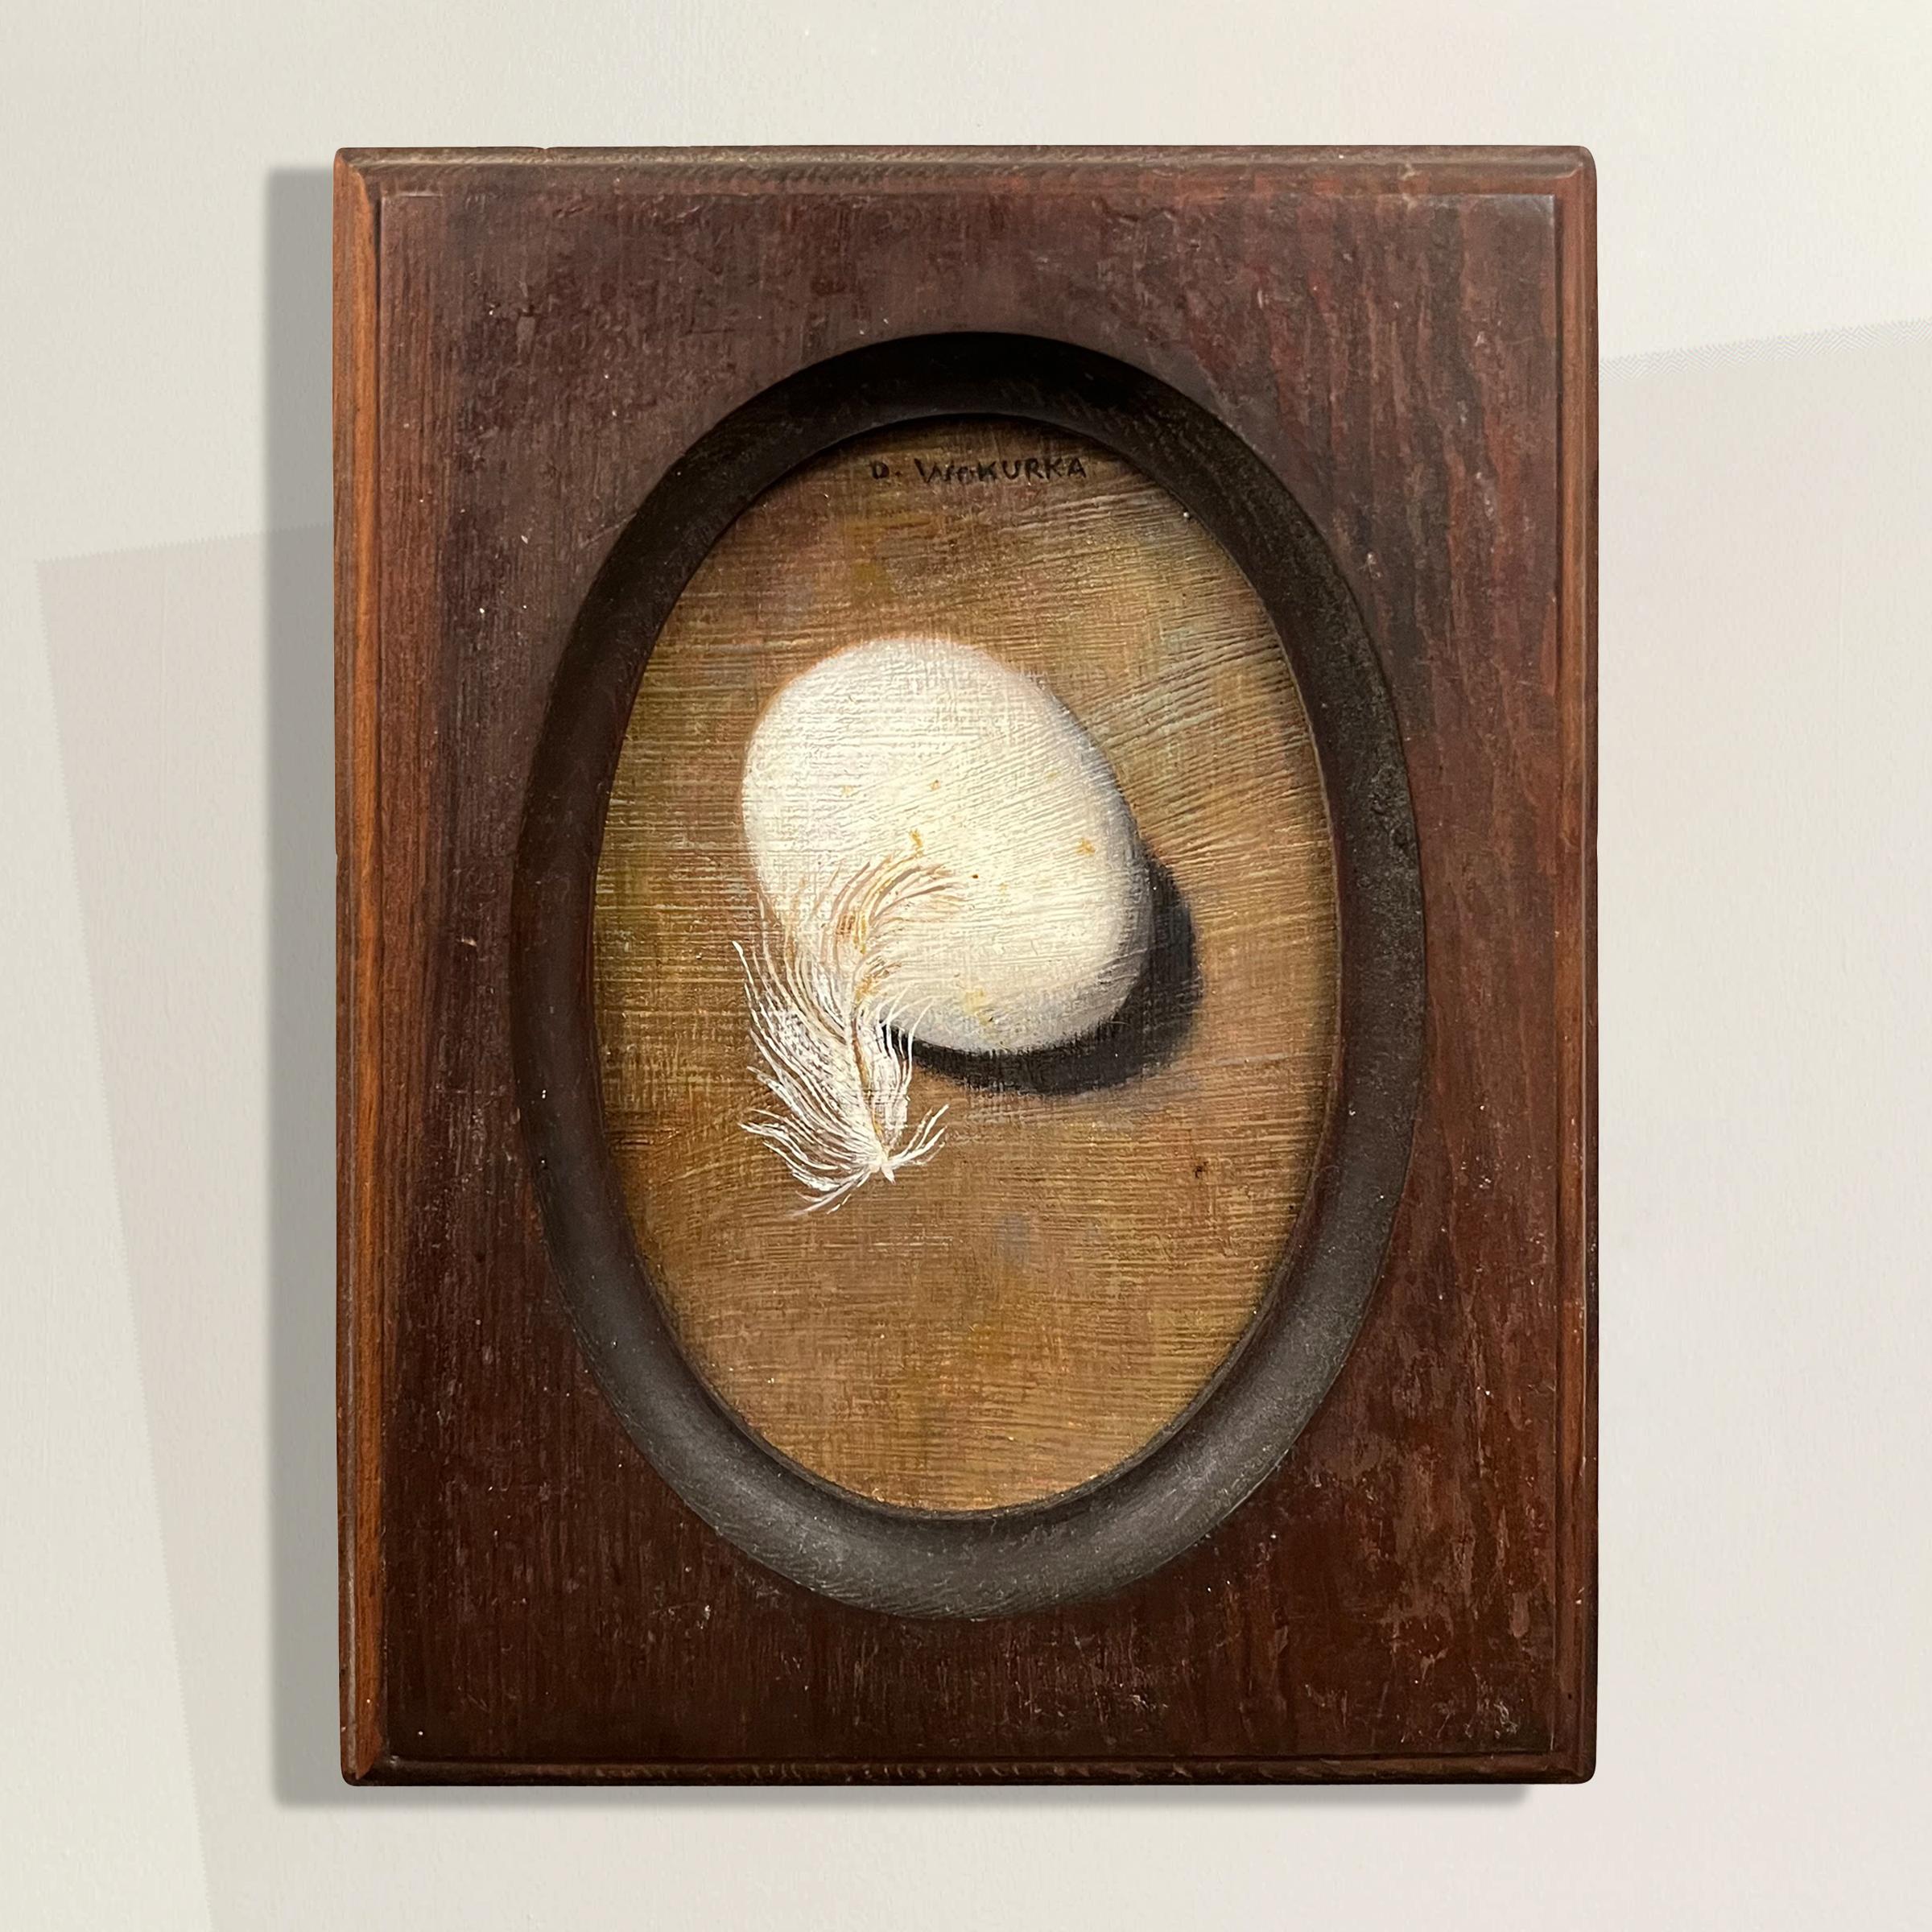 Painted by the celebrated Wisconsin artist Doris Wokurka (1929-1986), this exquisite miniature still life oil on board painting artwork captures a delicate composition of a chicken egg and feather. Measuring perfectly to fit an antique frame with an